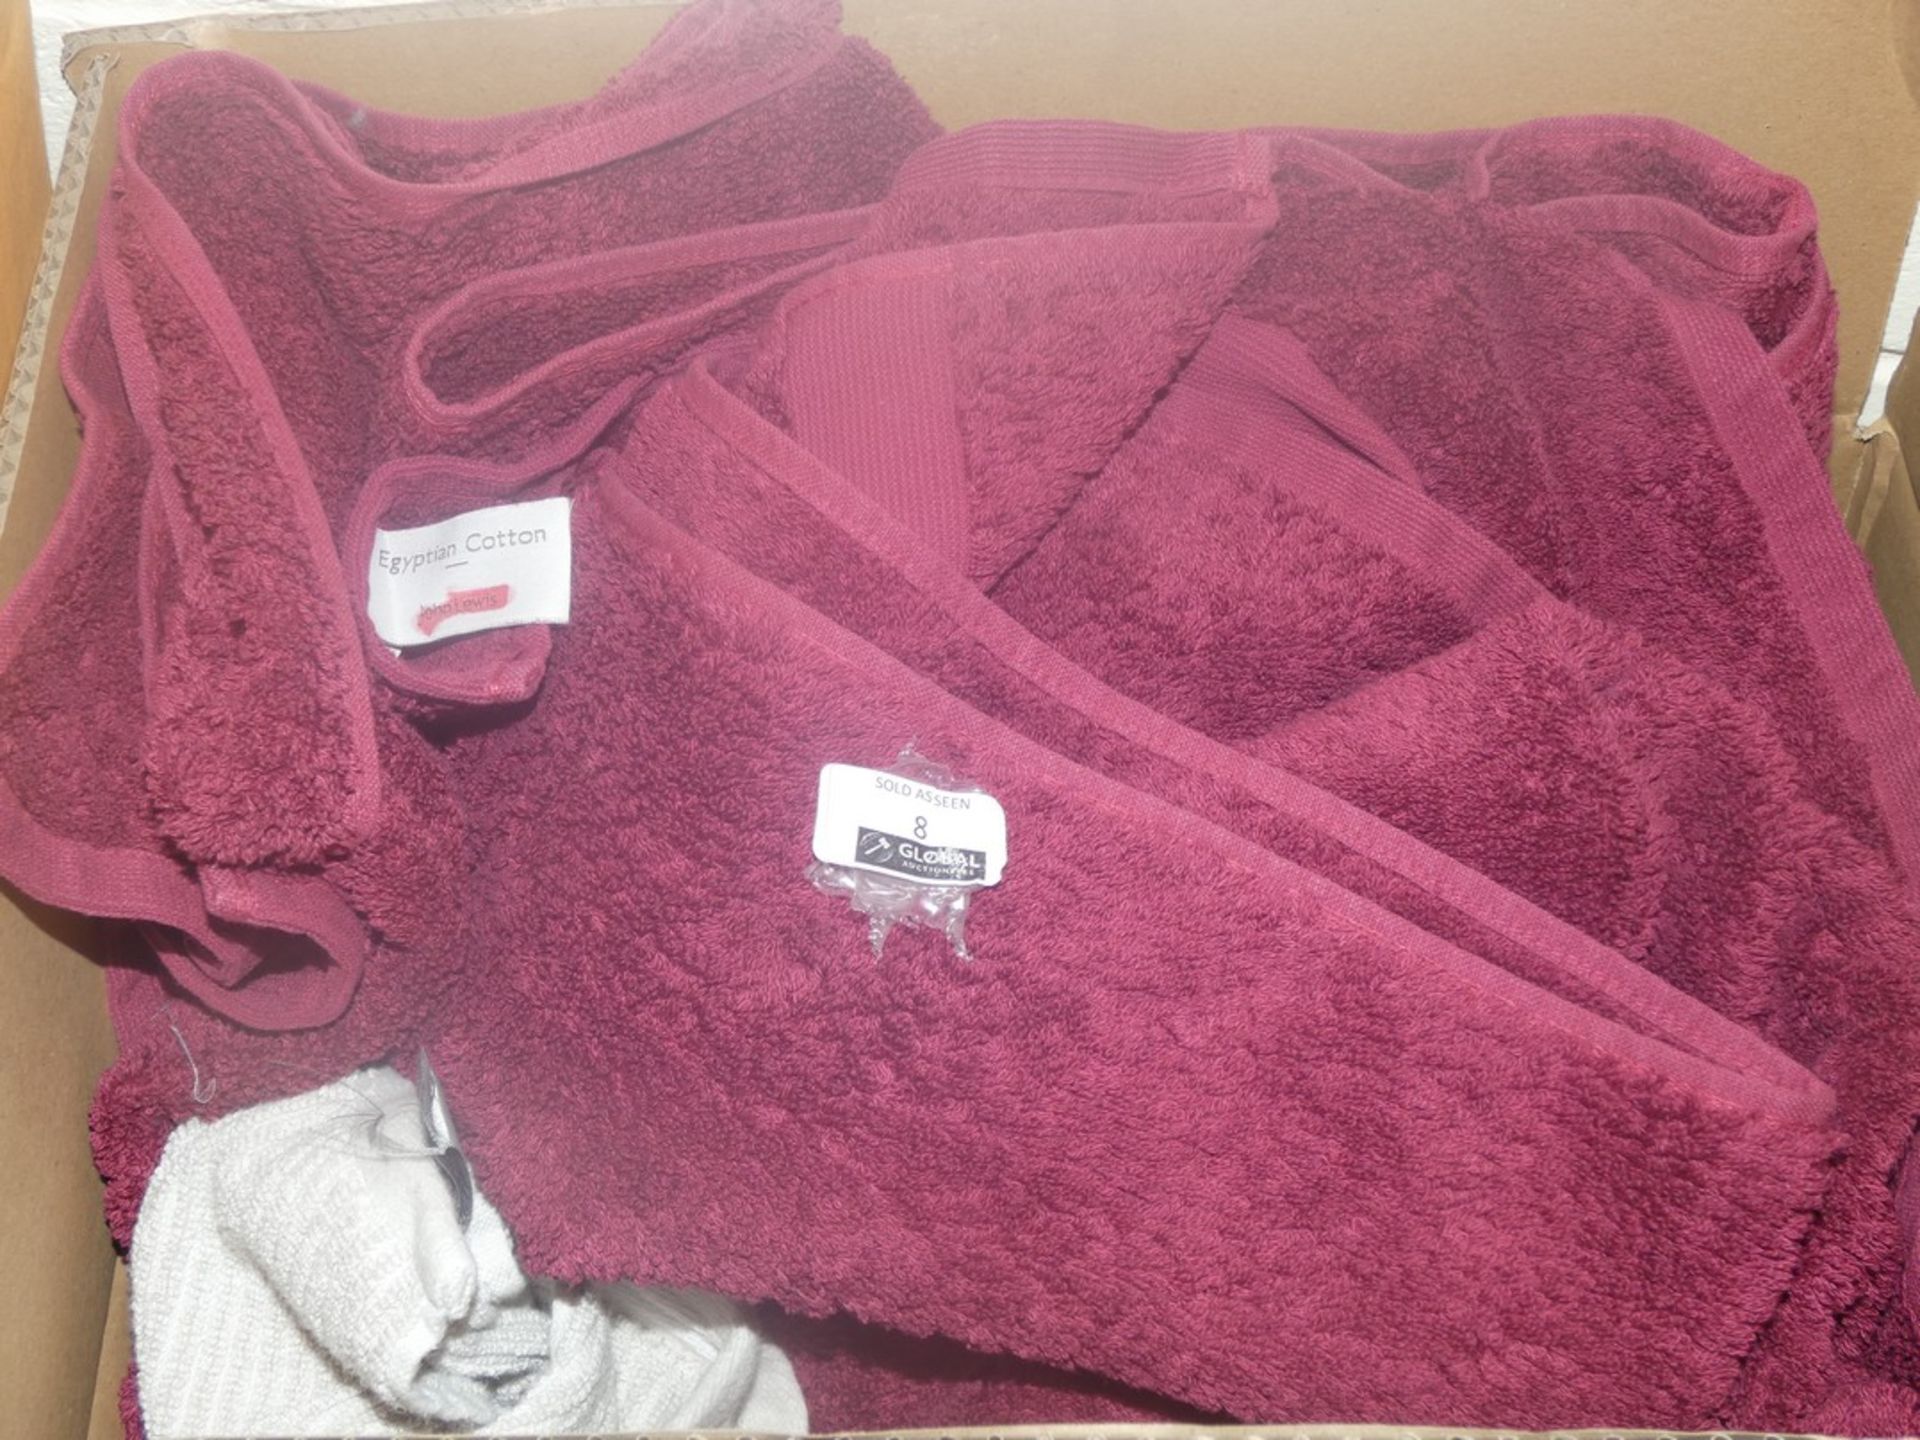 Lot to Contain 7 Assorted John Lewis and Partners Large Bath Towels, Supreme Cotton Bath Towels,